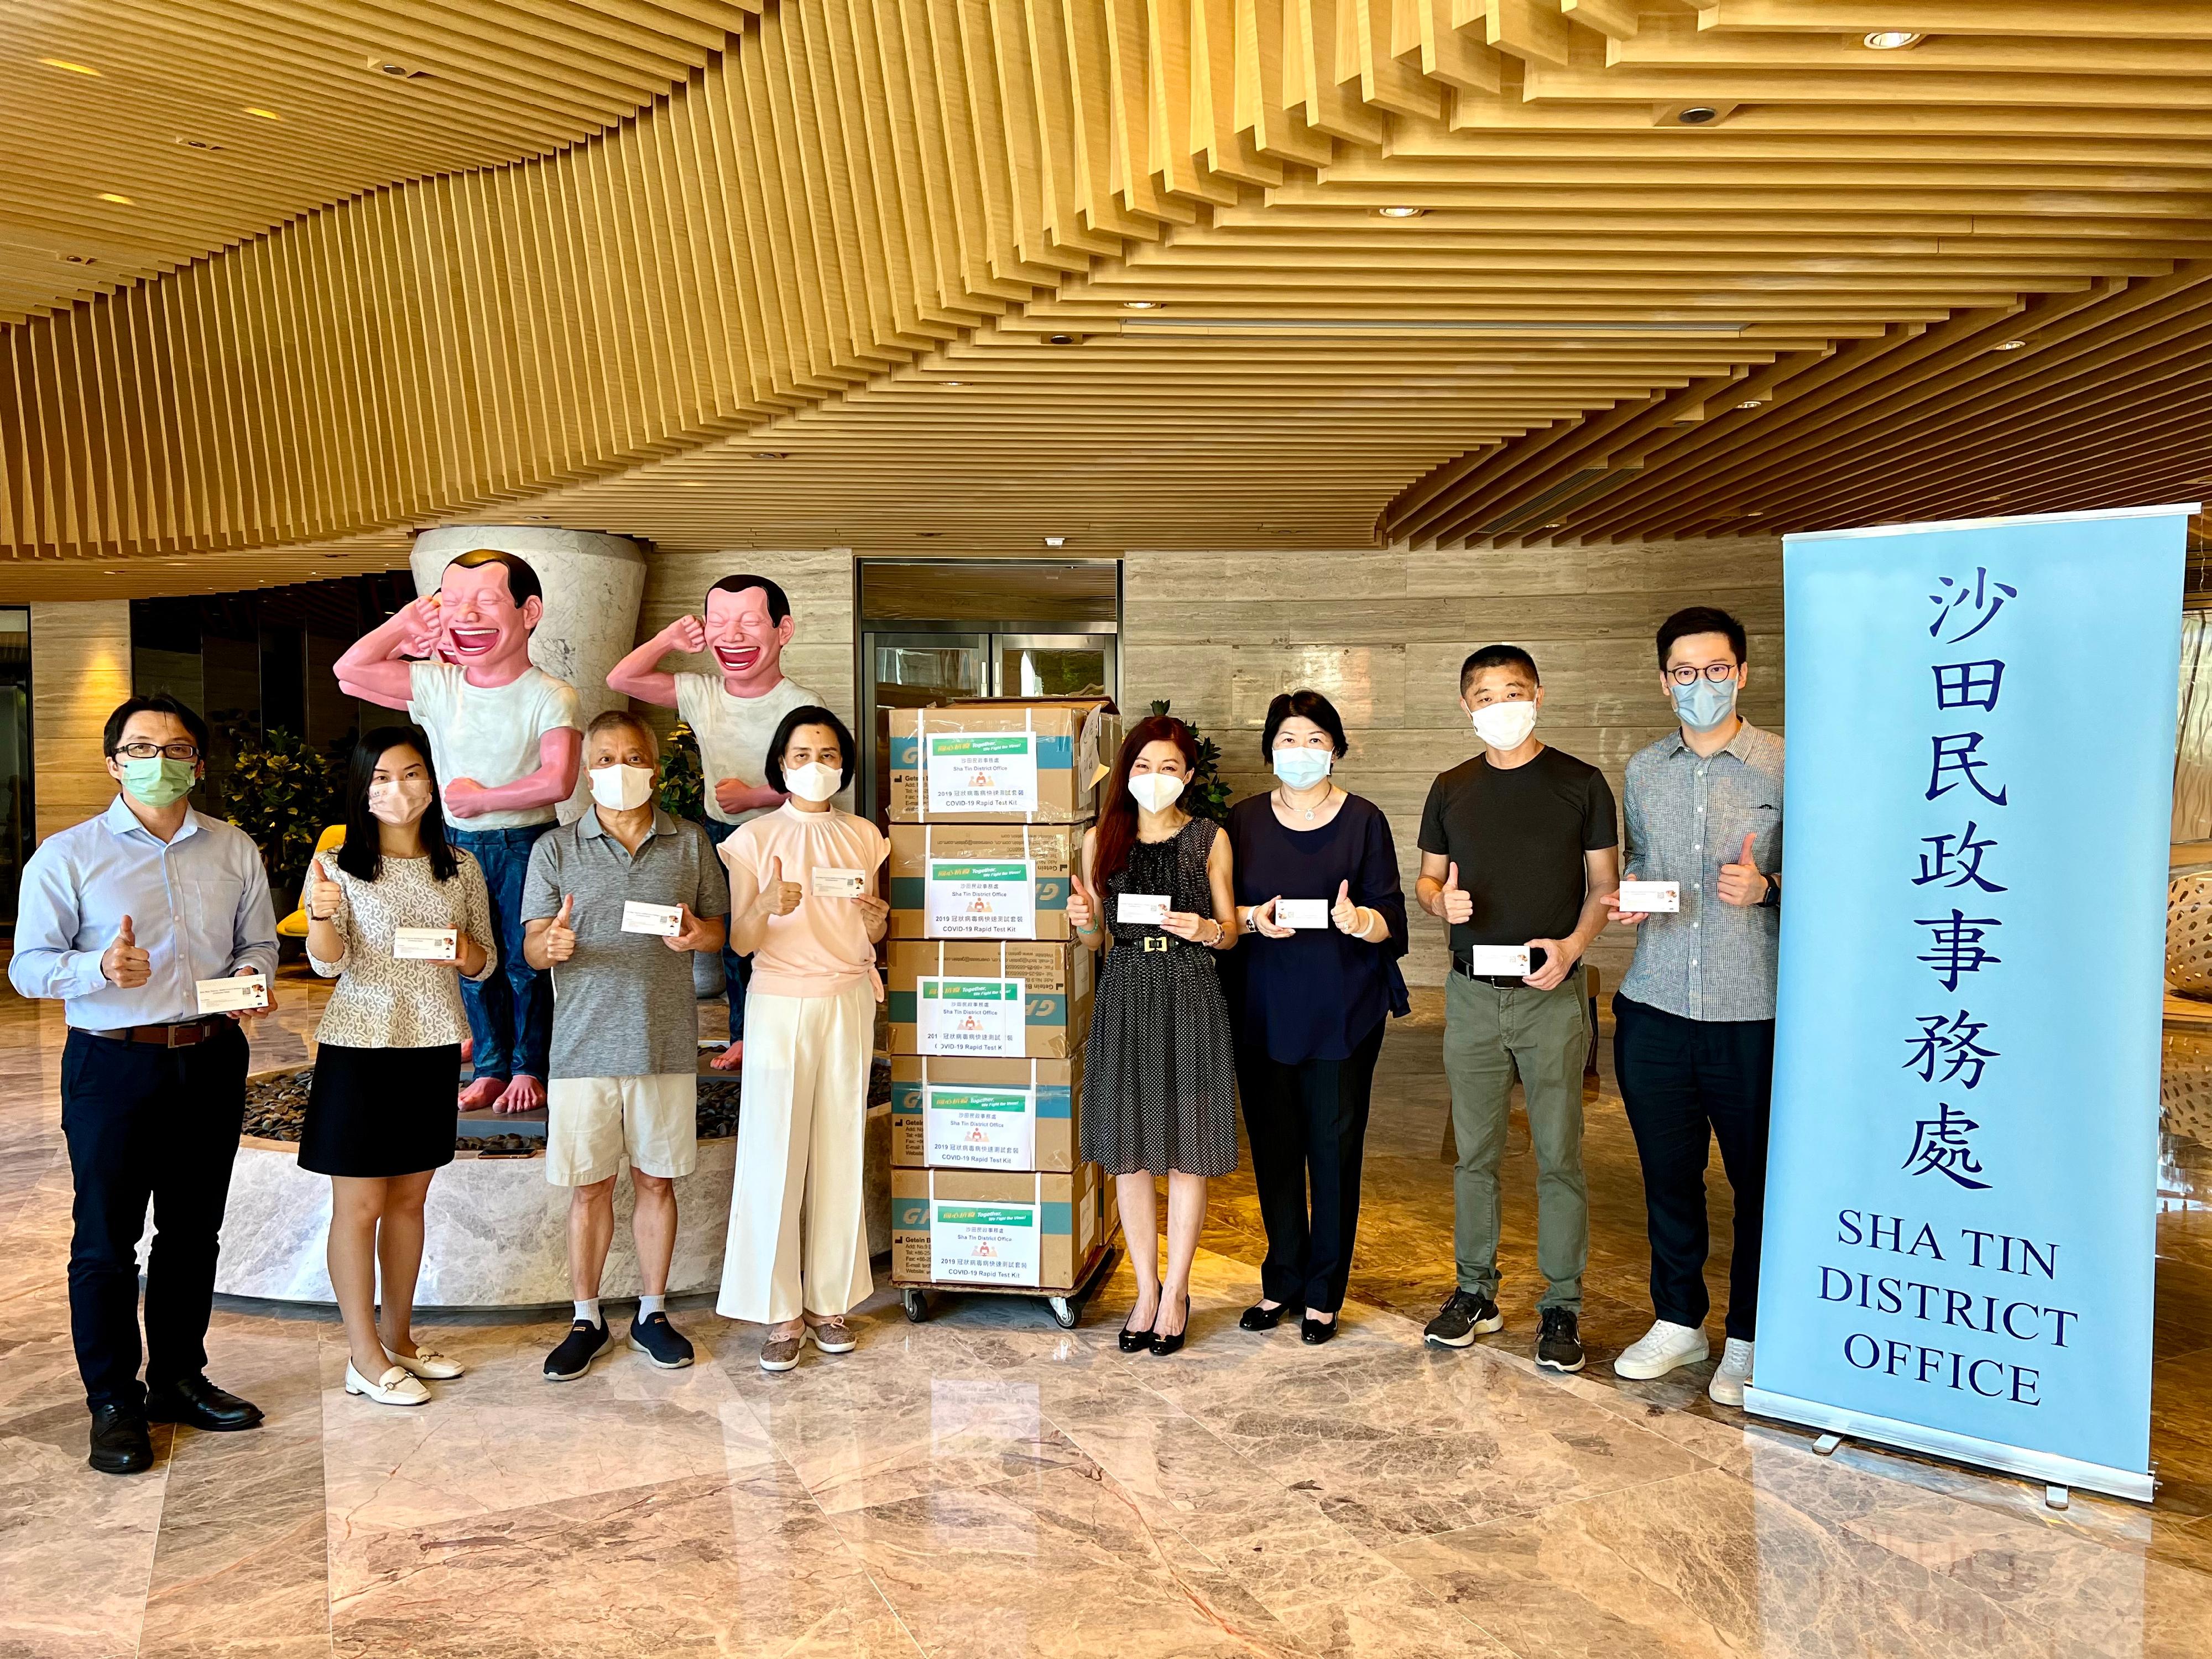 The Sha Tin District Office today (July 21) distributed COVID-19 rapid test kits to households, cleansing workers and property management staff living and working in Double Cove for voluntary testing through the owners’ committee.  